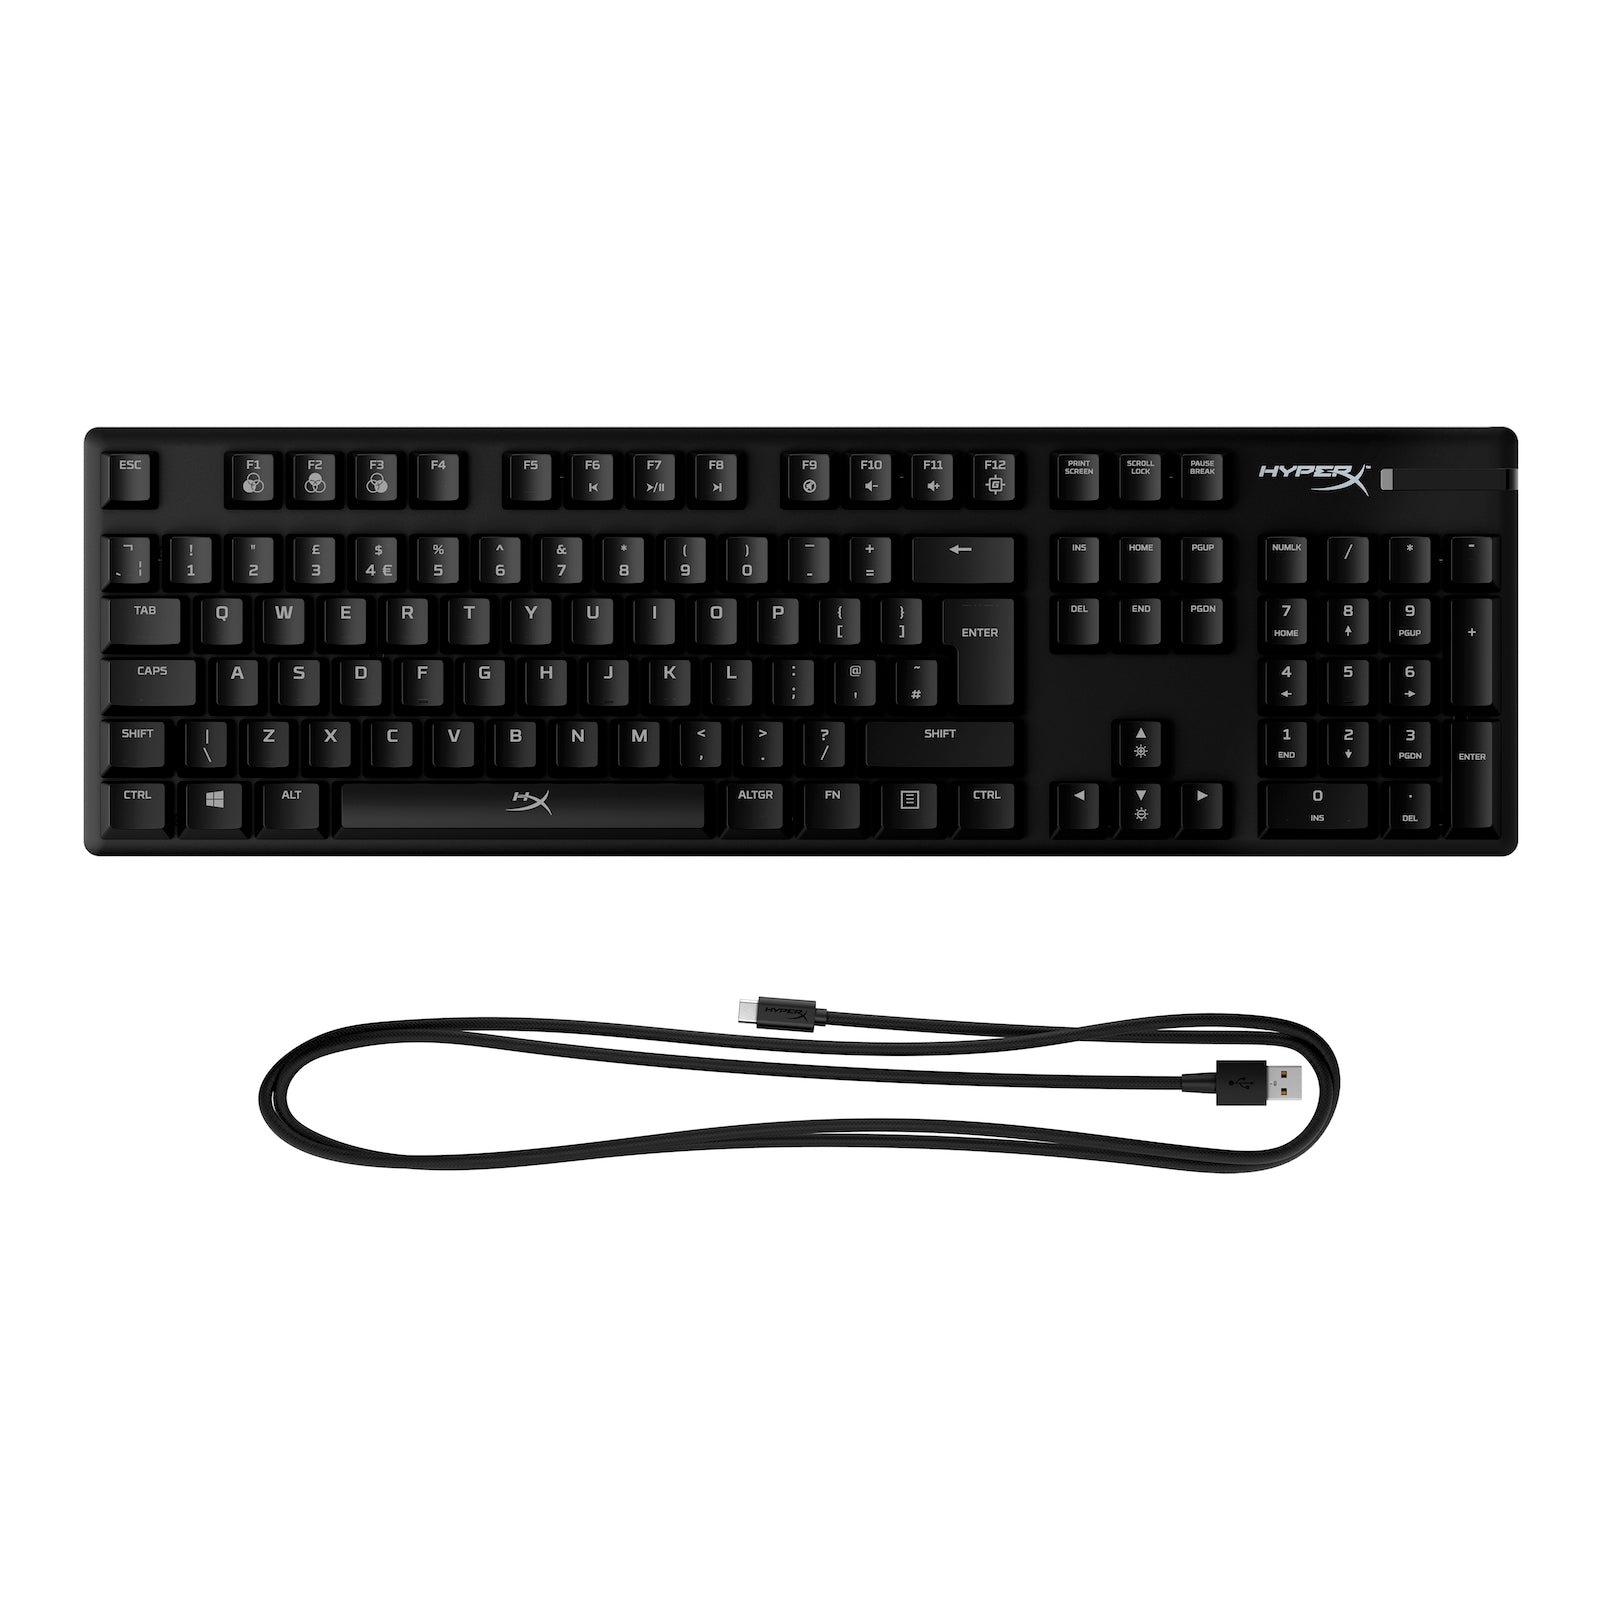 HyperX Alloy Origins mechanical gaming keyboard featuring detachable cable